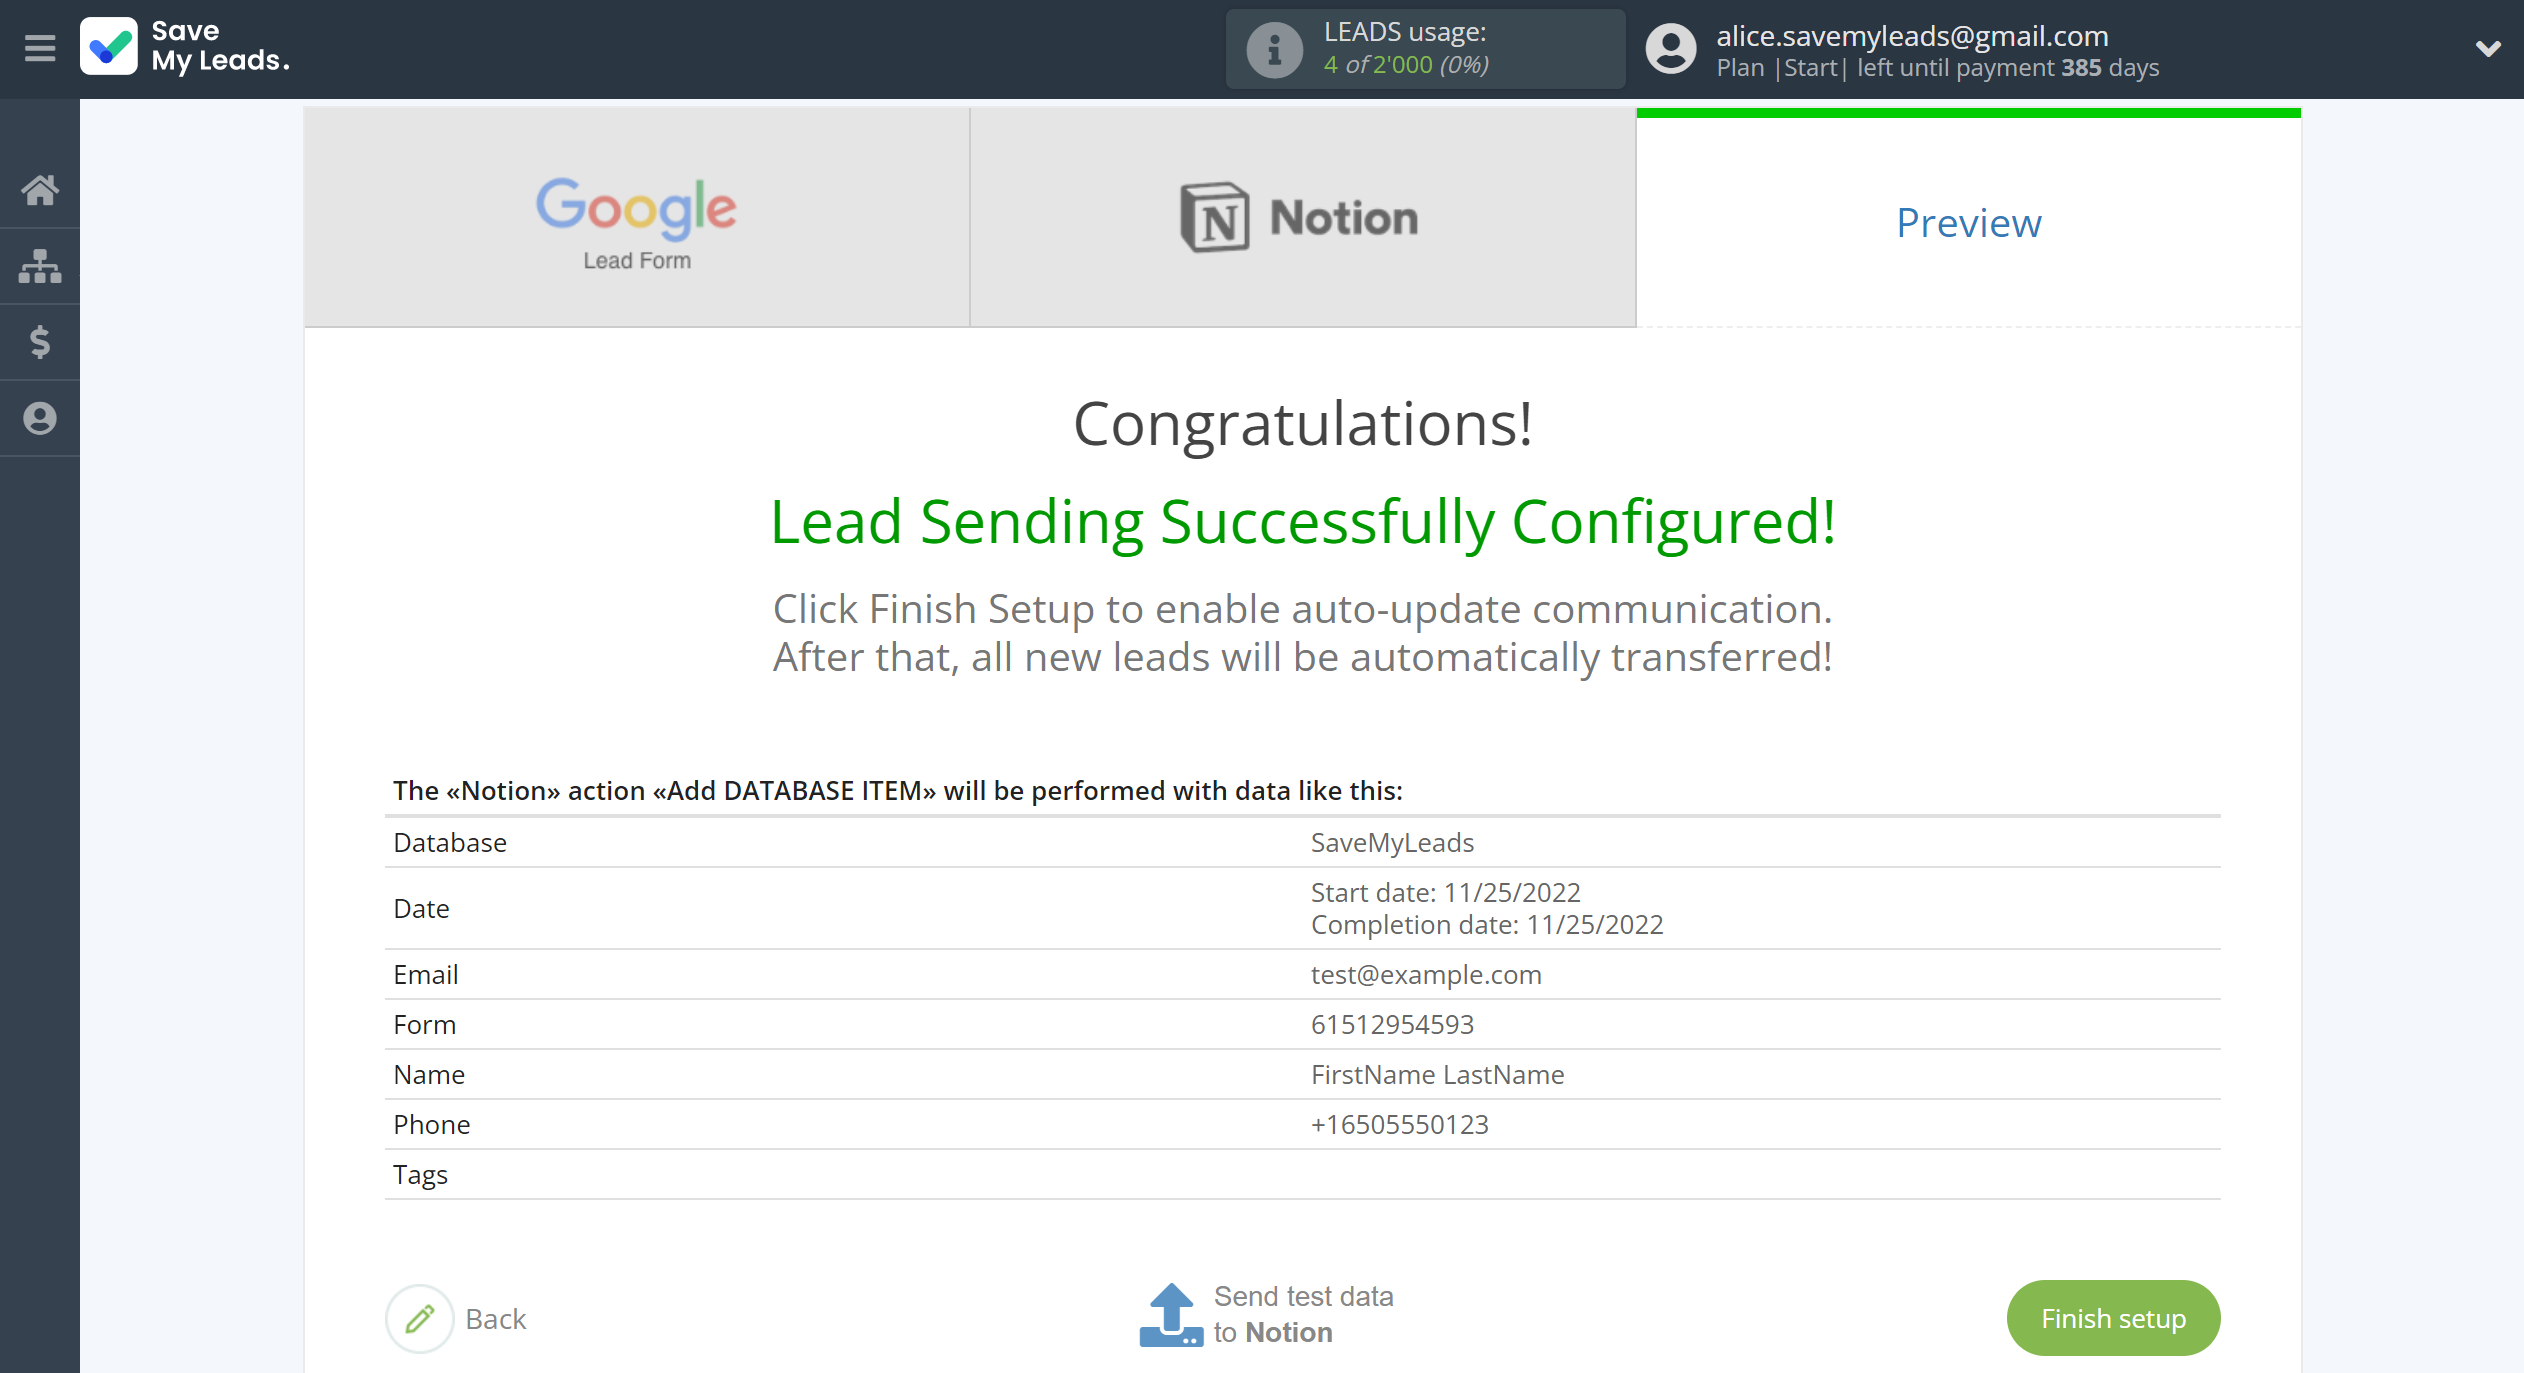 How to Connect Google Lead Form with Notion | Test data